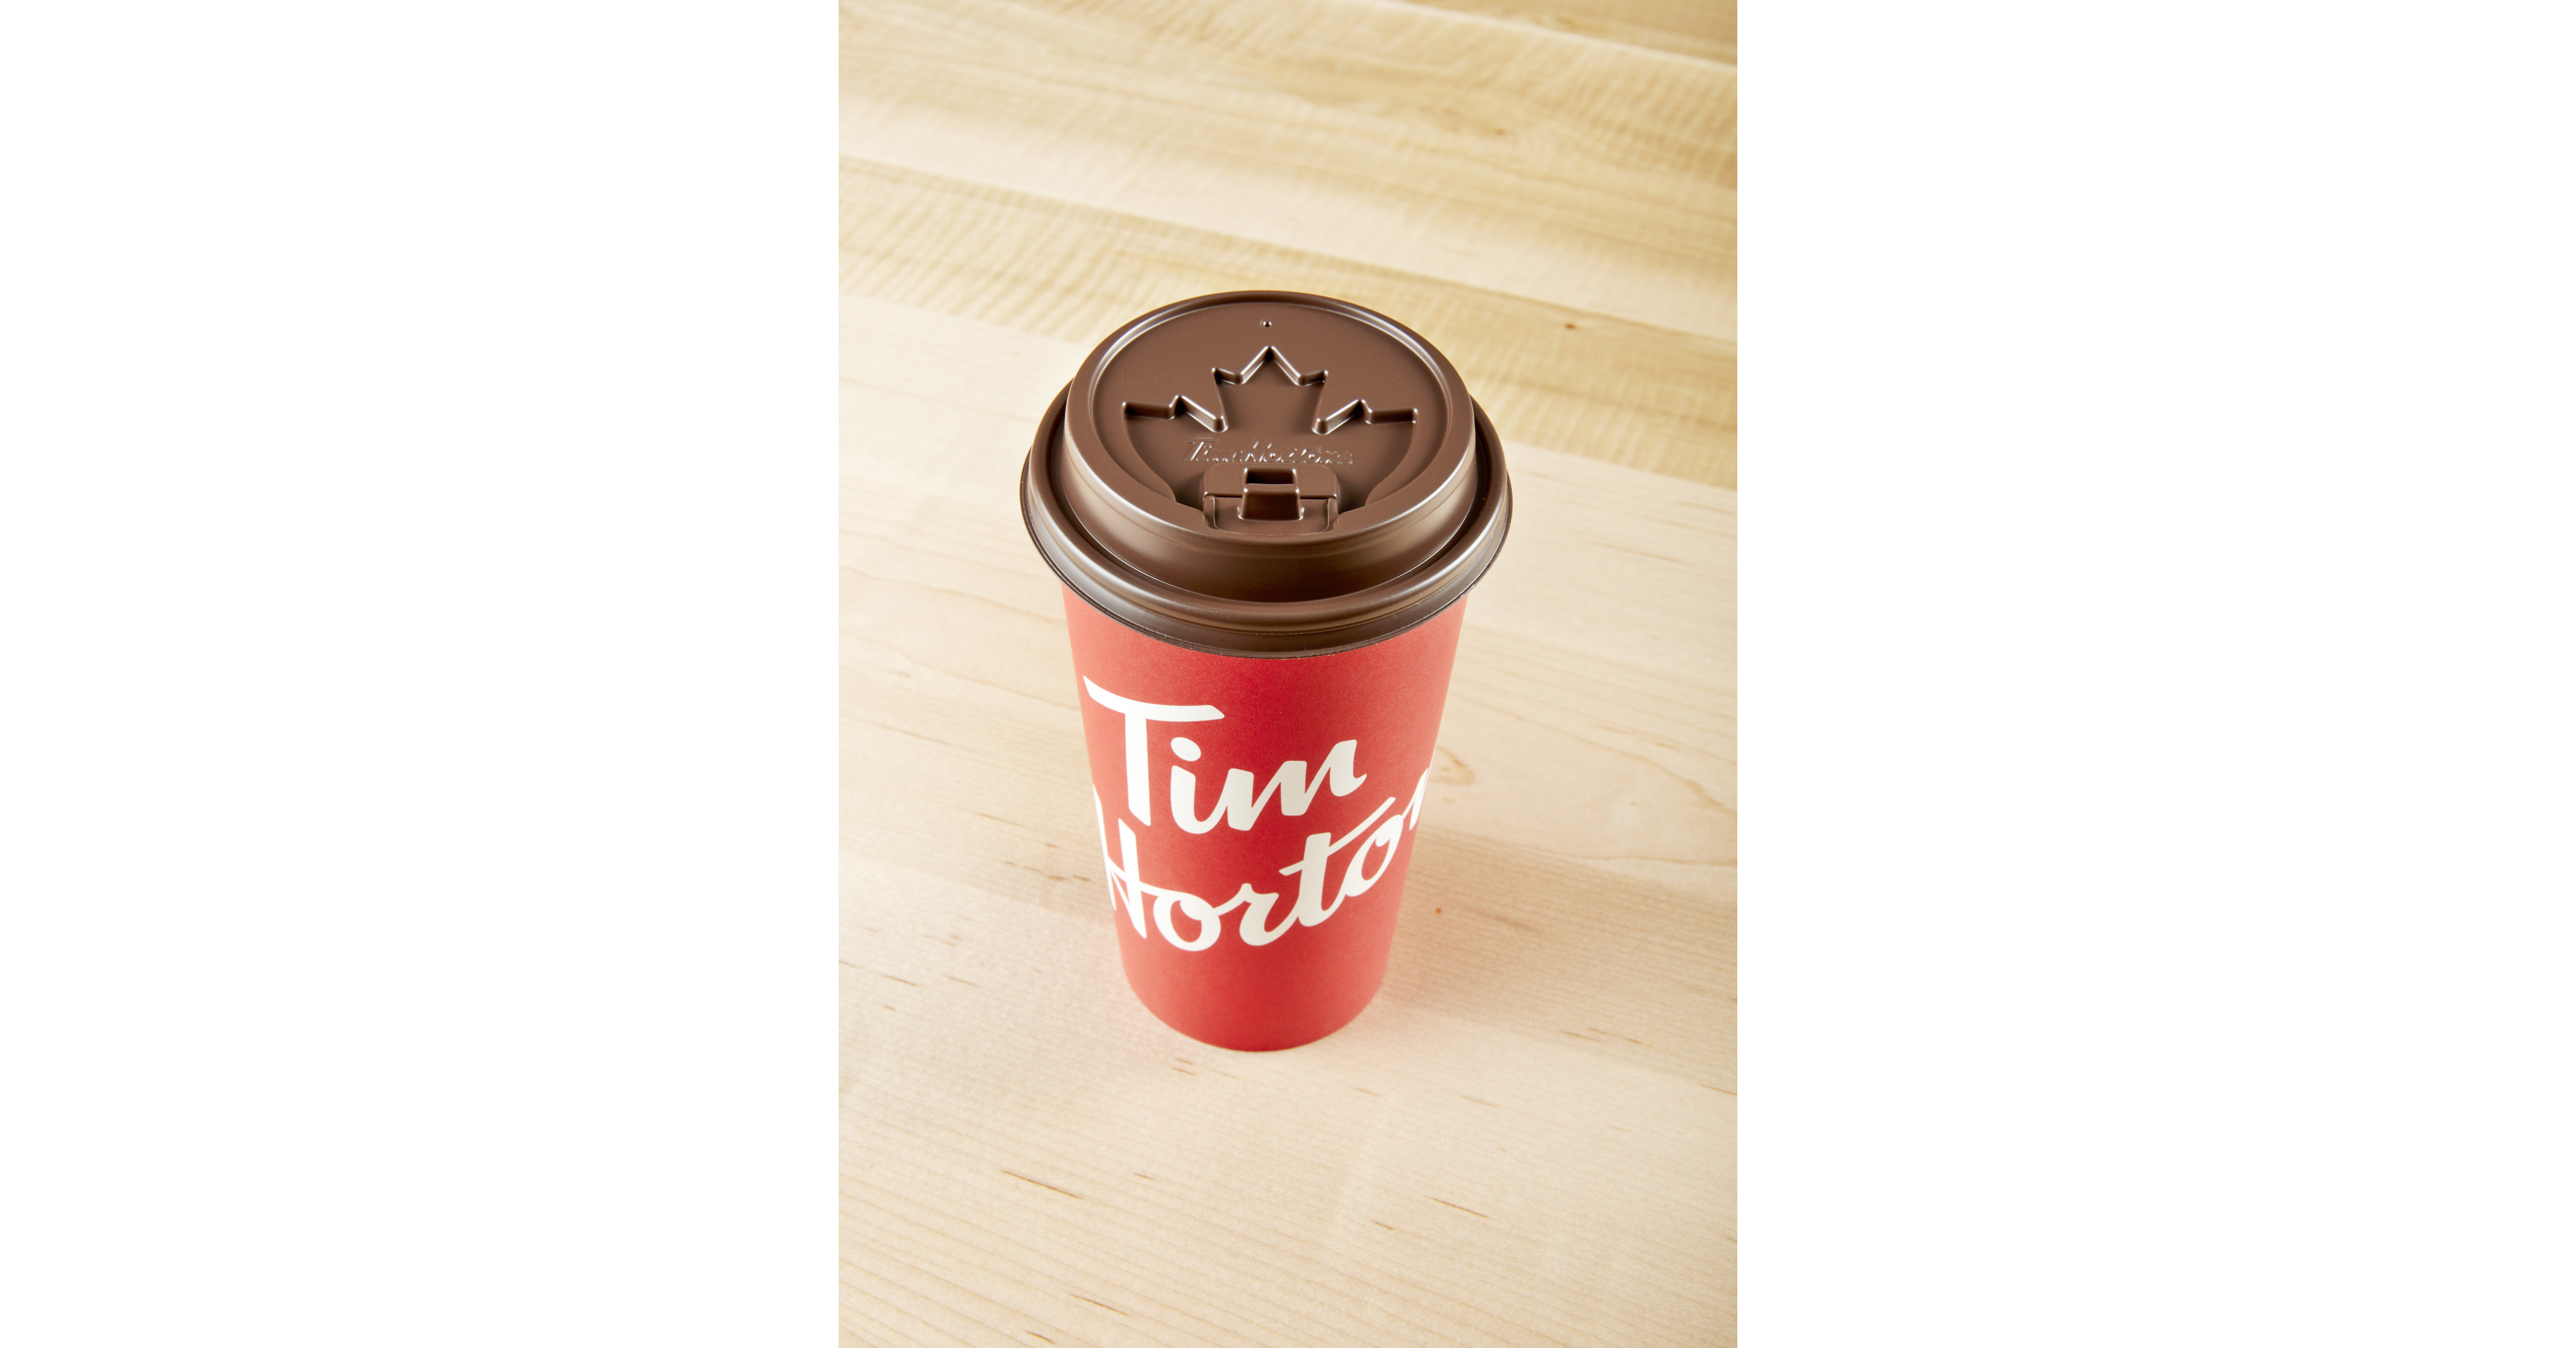 Tim Hortons Makes Investments To Elevate The Coffee Experience For Guests